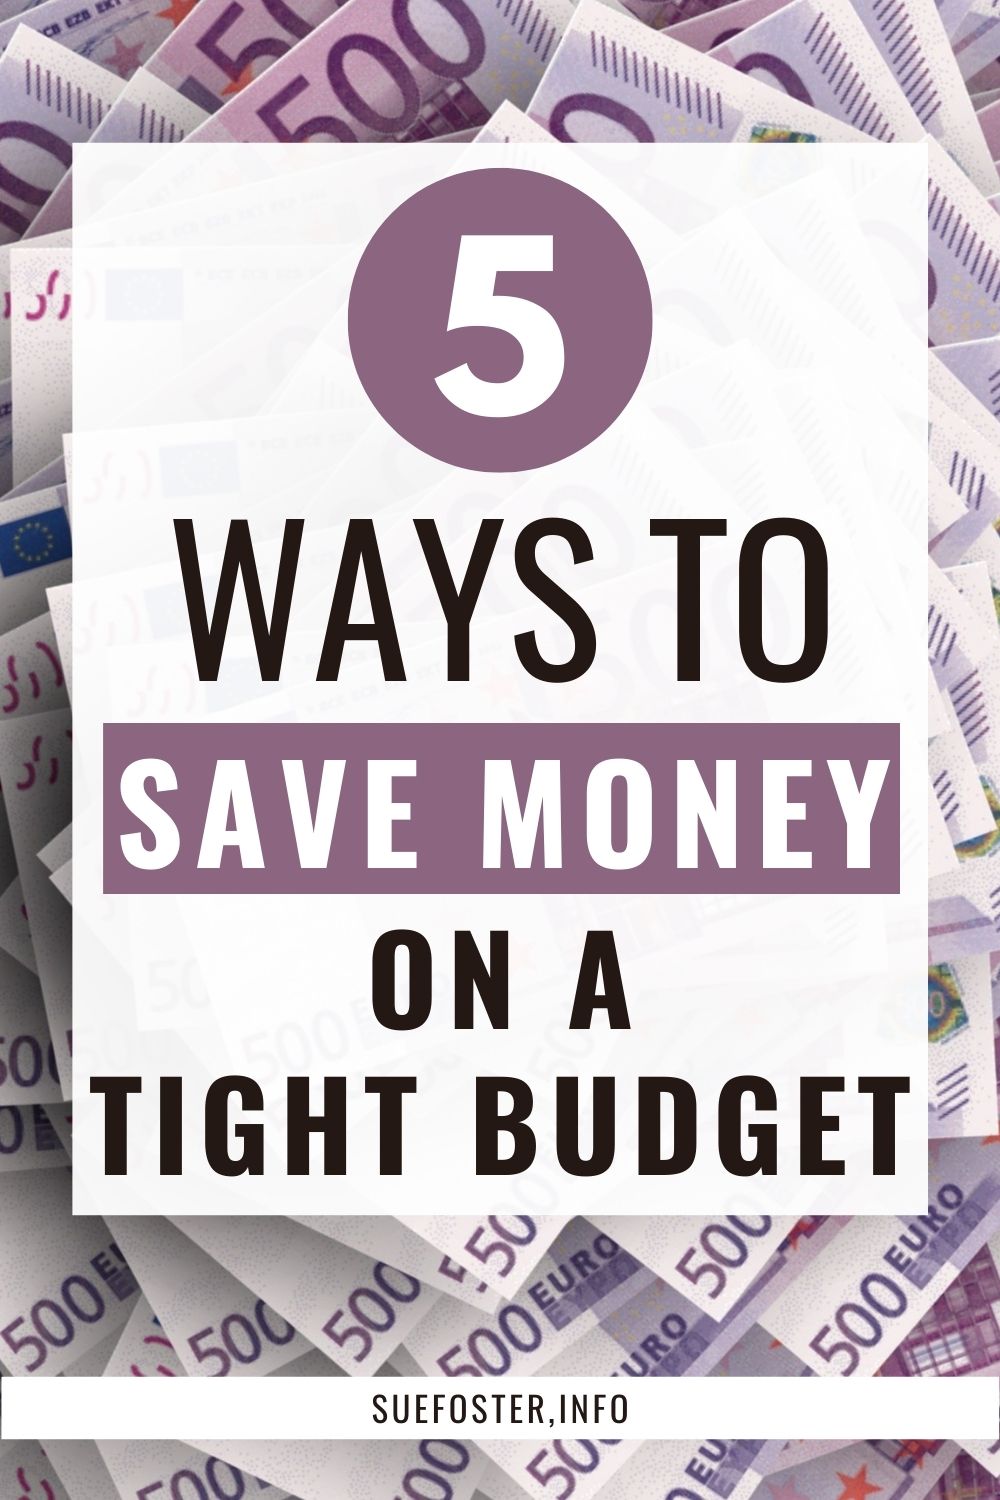 Five ways to save money on a tight budget, that might save you a few extra pounds.